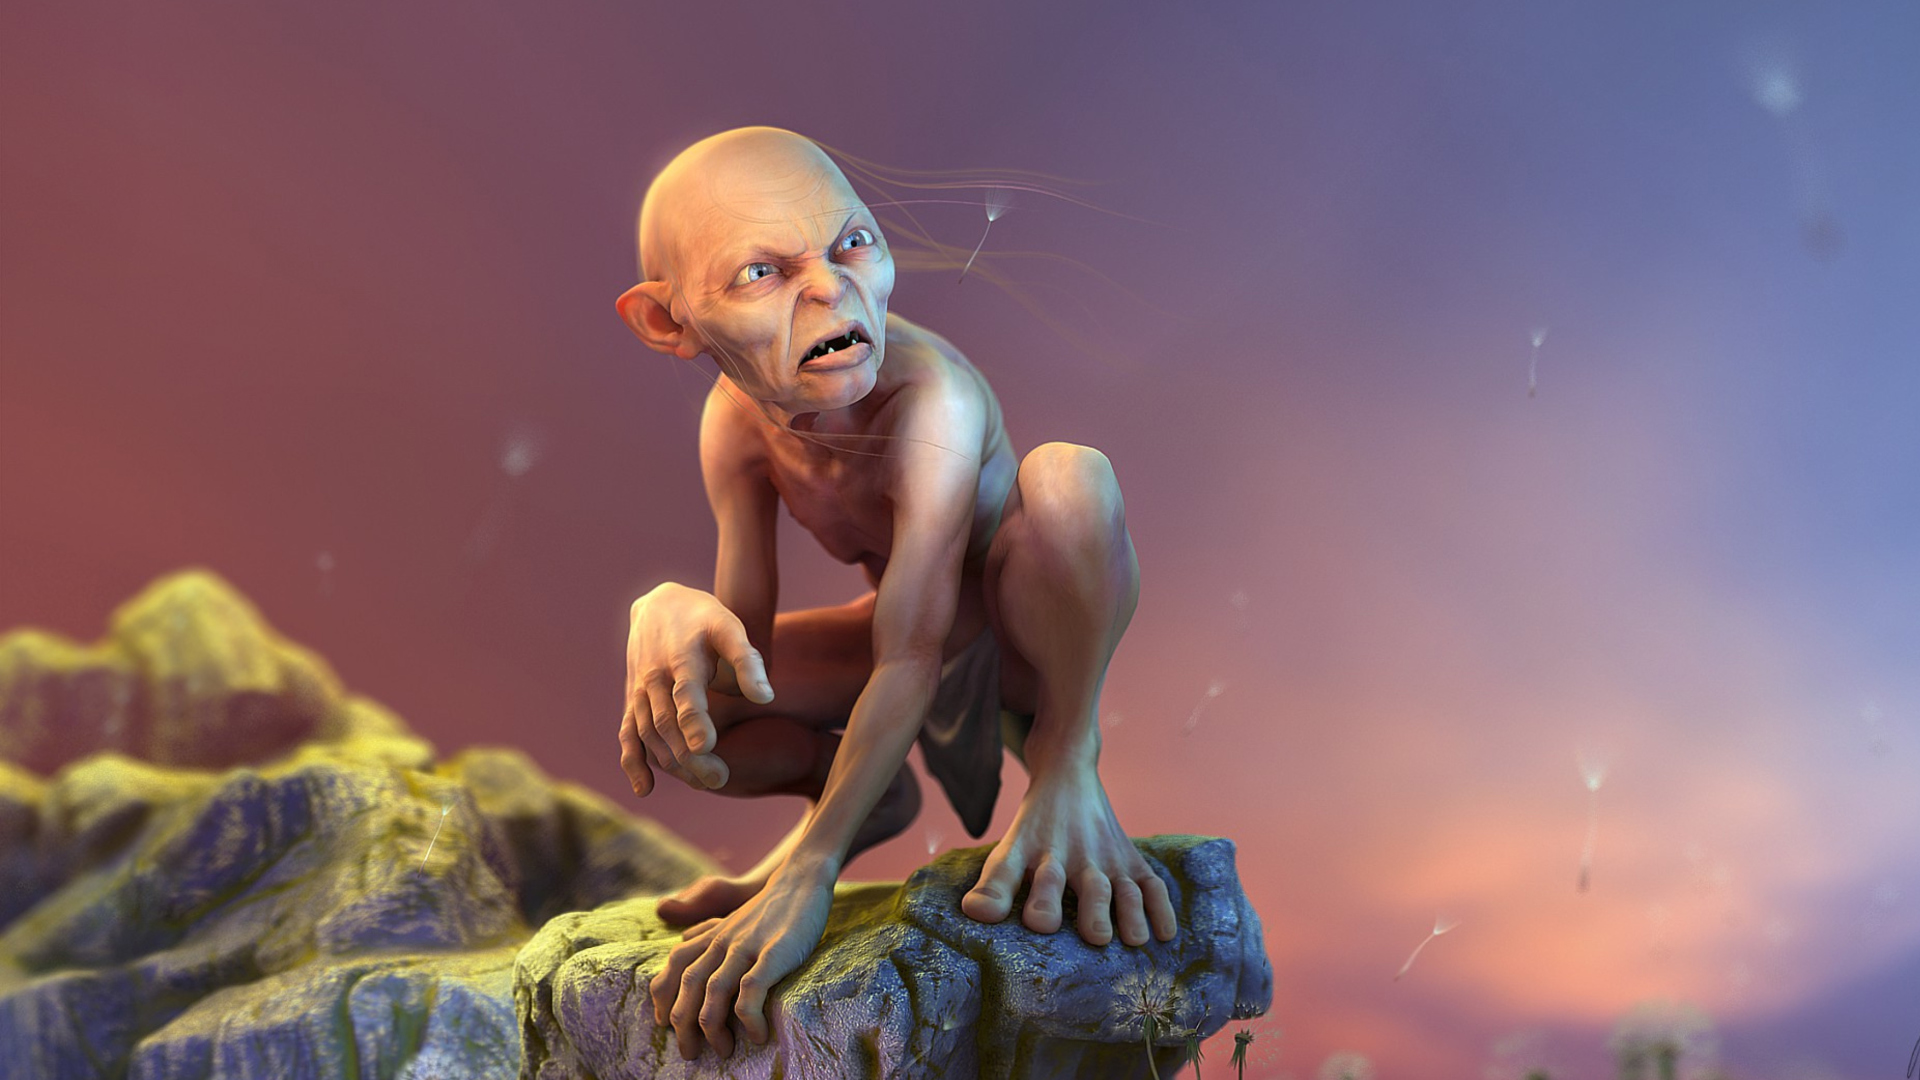 Gollum - Lord Of The Rings wallpaper 1920x1080